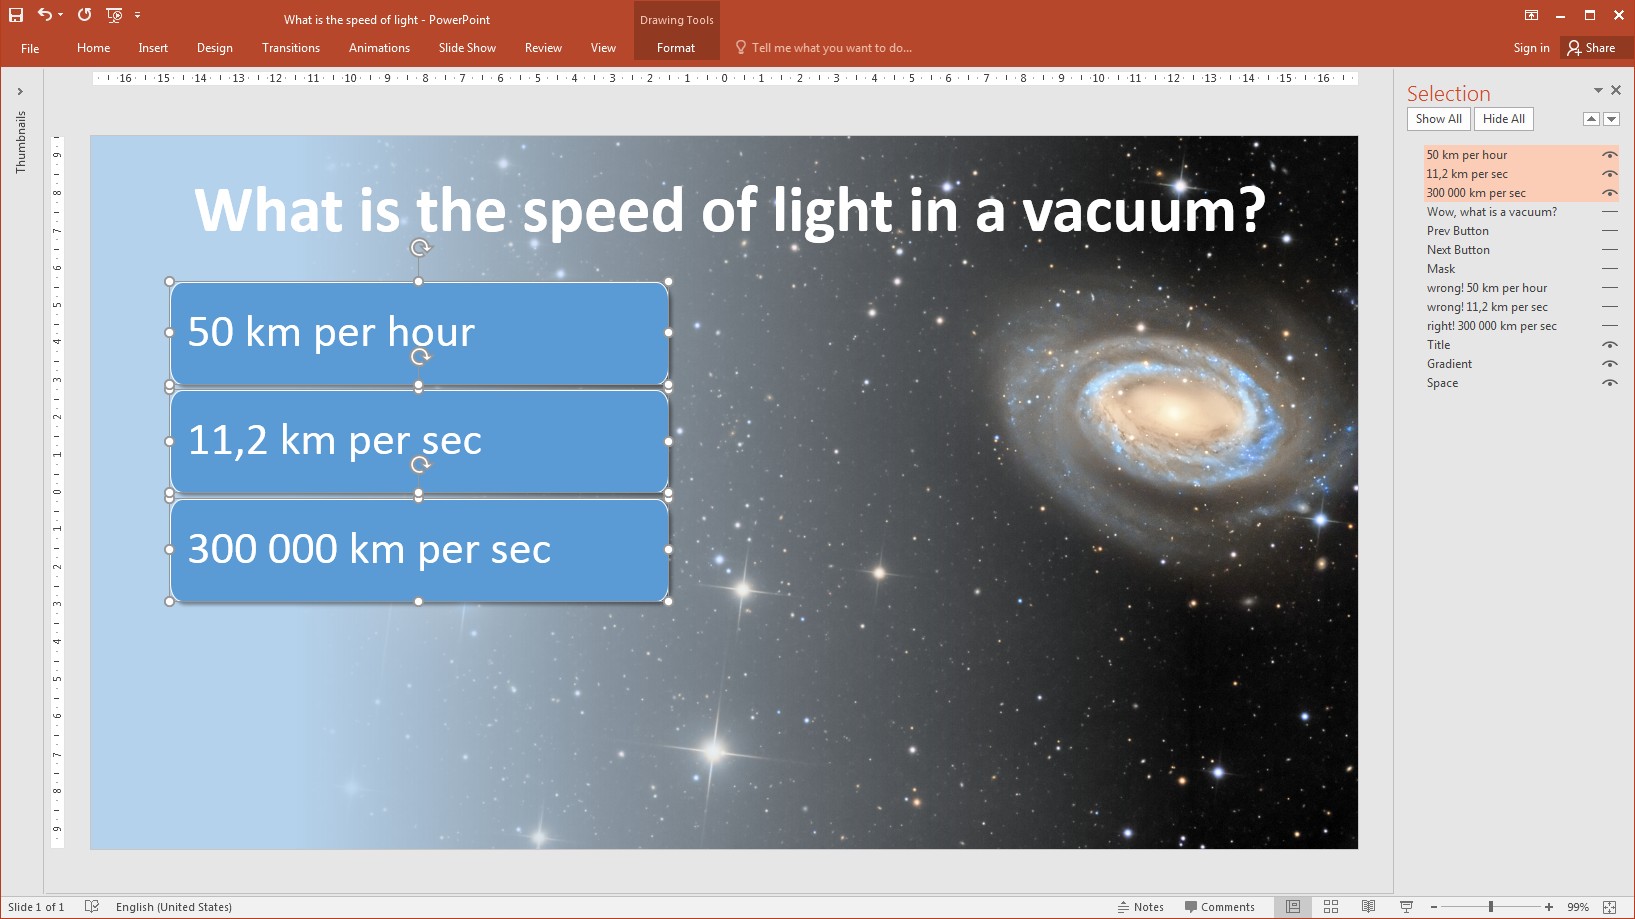 PowerPoint Triggers: Making Interactive Presentation. Answer options as triggers